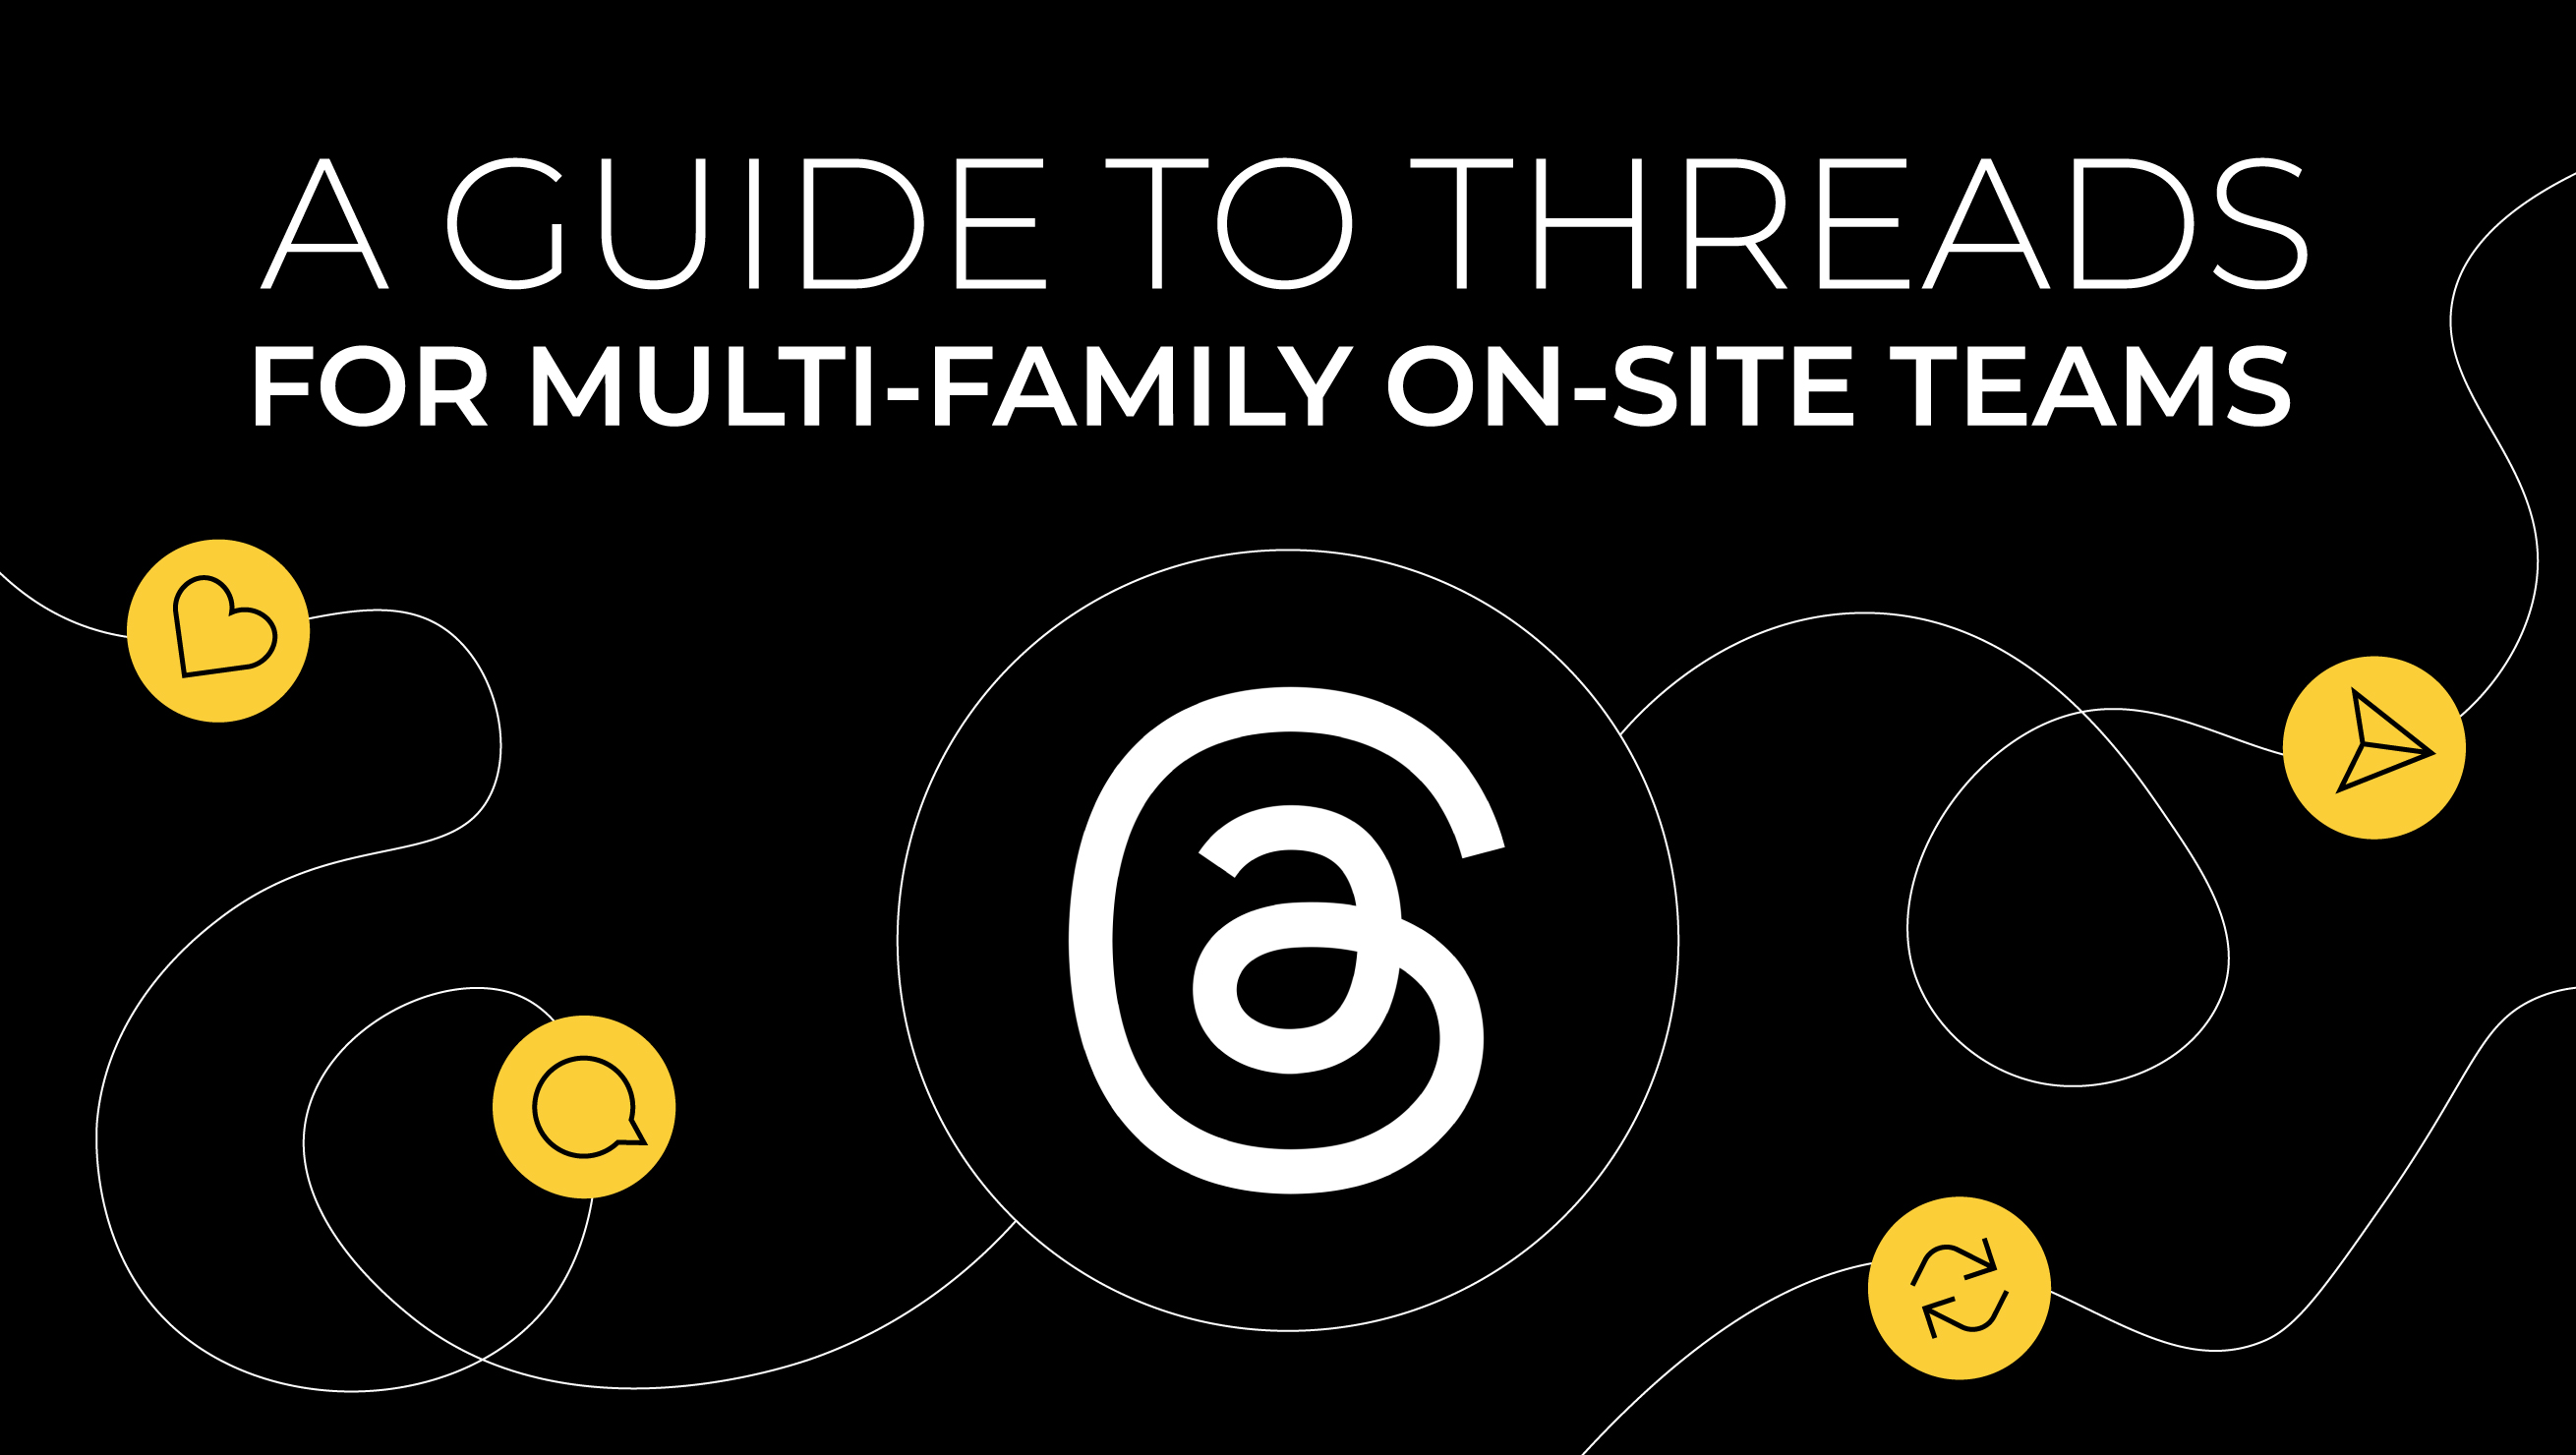 A Guide to Threads for Multi-Family On-Site Teams